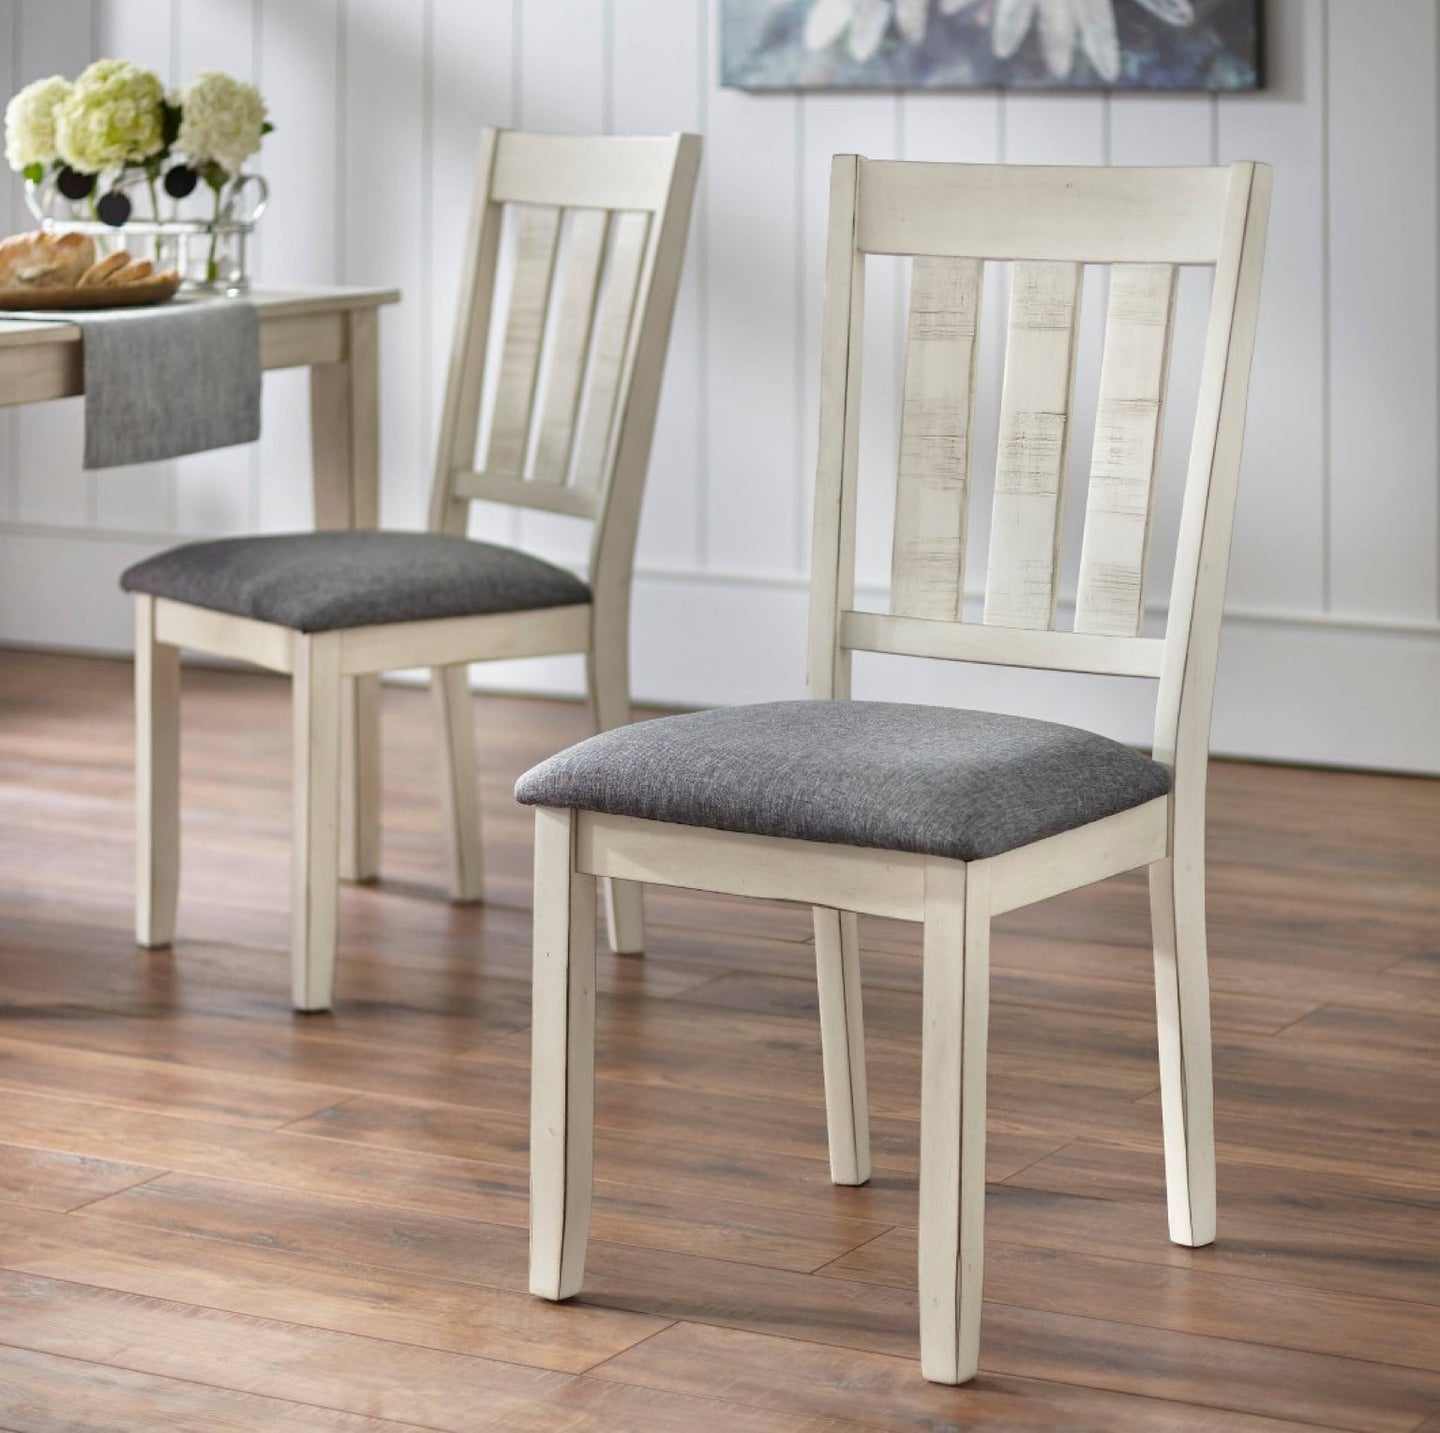 Set of 2 Olin Dining Chair White/Gray #4148